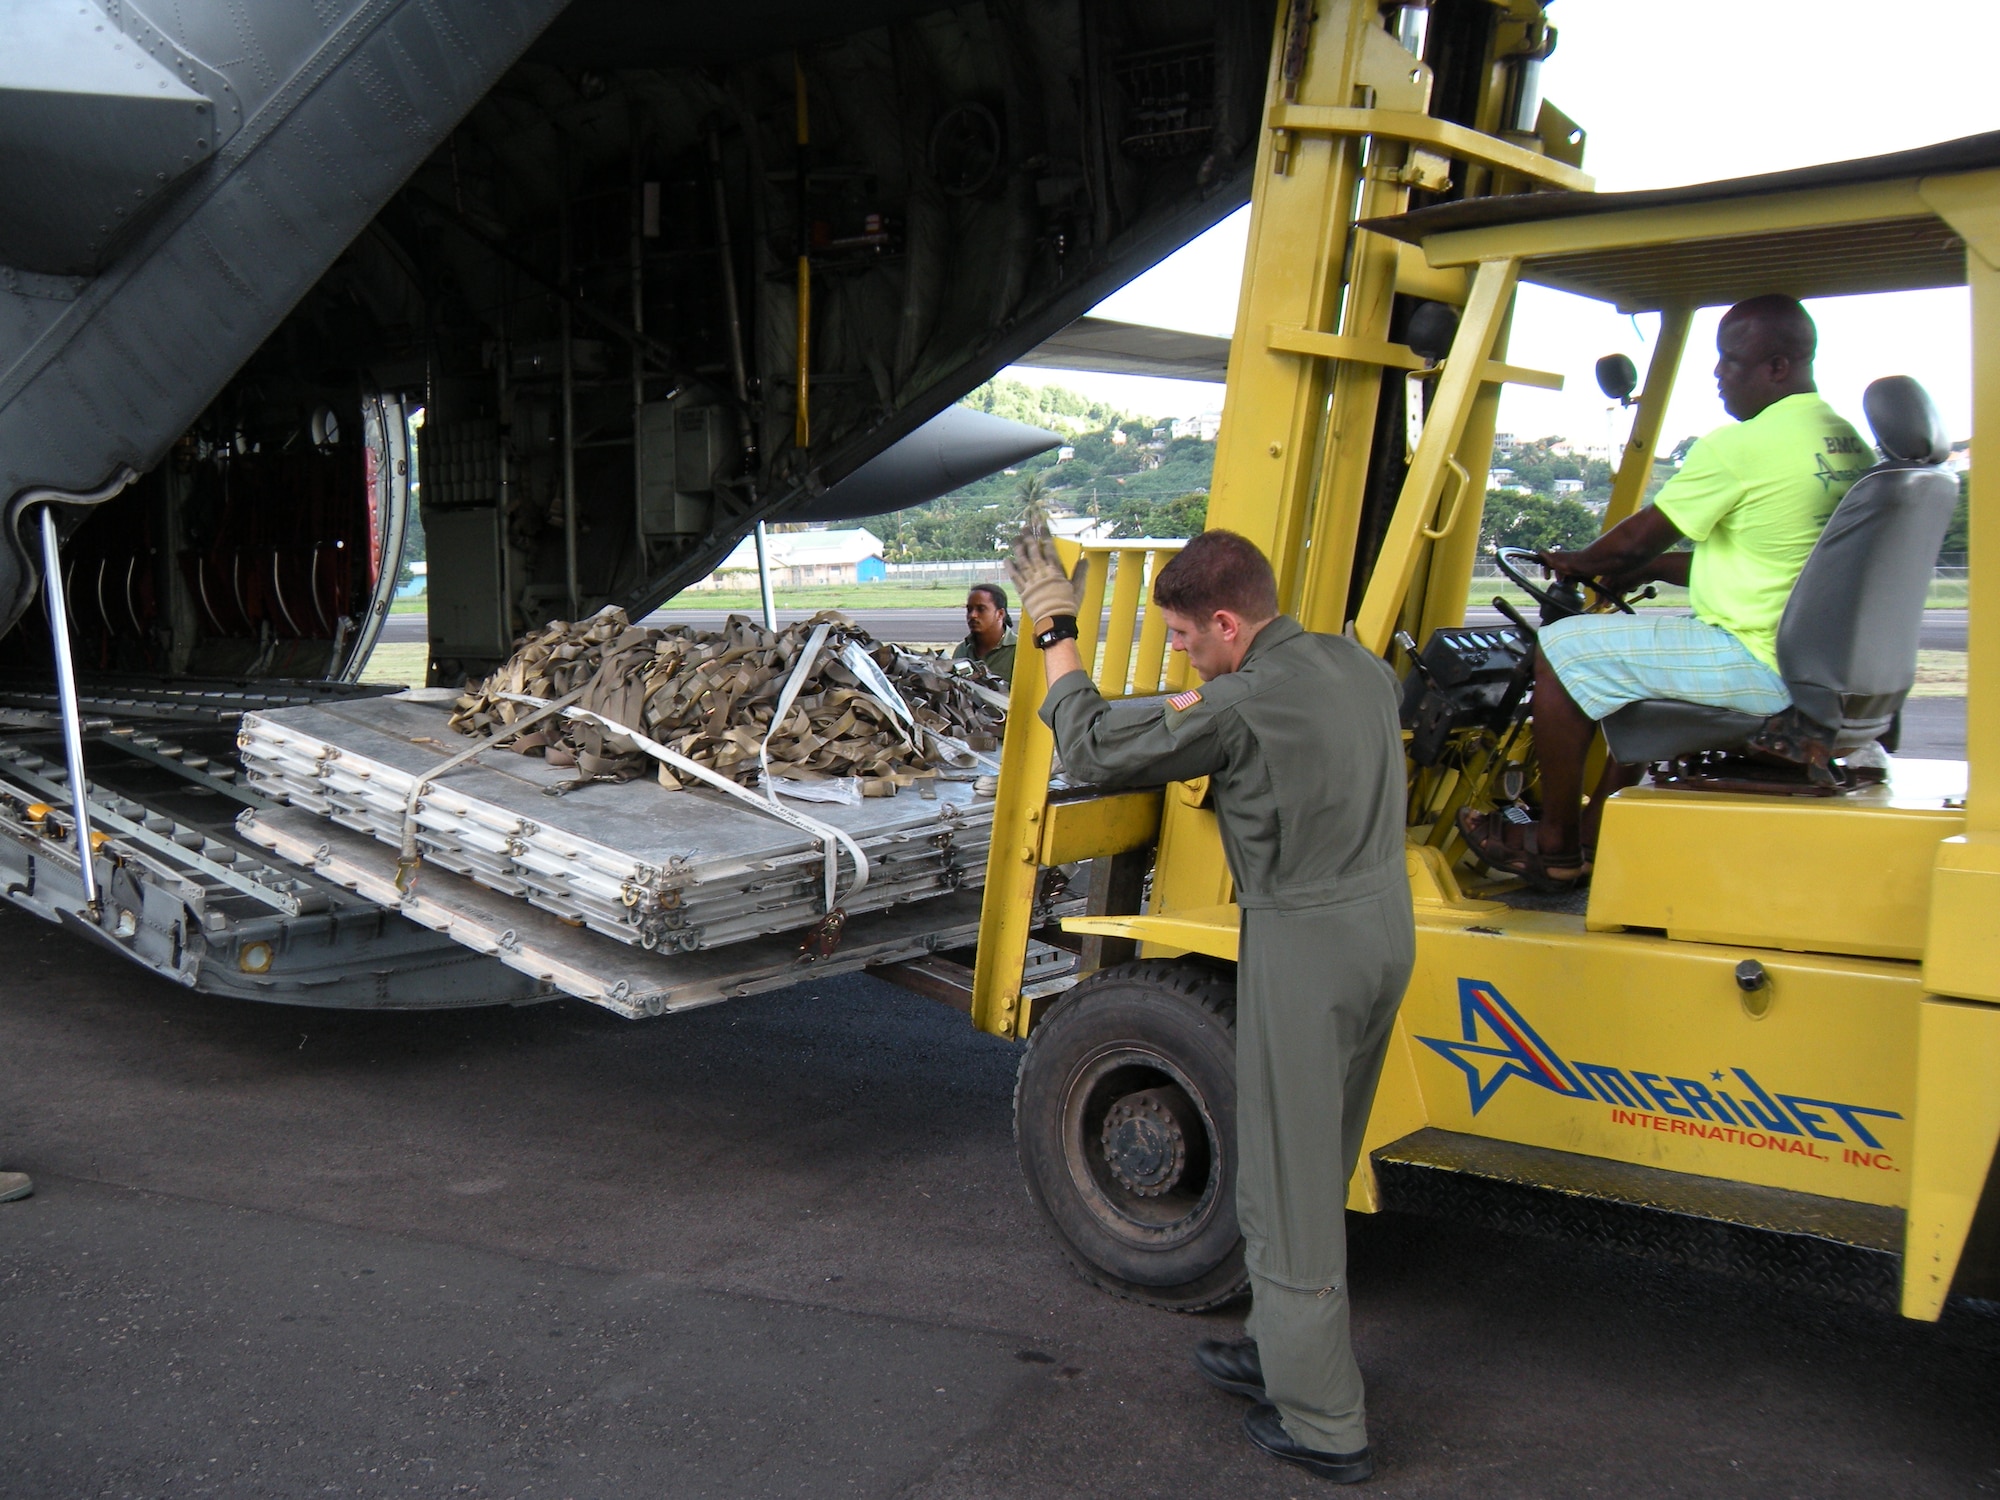 Staff Sgt. James Jorgensen, 731st Airlift Squadron loadmaster, helps to guide a forklift into position to re-load pallets on to a 302nd Airlift Wing C-130 Hercules Oct. 30 after delivering humanitarian supplies to the Caribbean island of St. Vincent. The supplies, donated by Wausau, Wis.-based Good News Project, included hospital and mental health supplies as well as desks, paper and school supplies to various locations on the island. The Air Force Reserve aircraft hauled the supplies under the Denton Amendment, which authorizes U.S. military aircraft via Congress to airlift humanitarian supplies based on space availability and other factors. (U.S. Air Force photo/Staff Sgt. Stephen J. Collier)